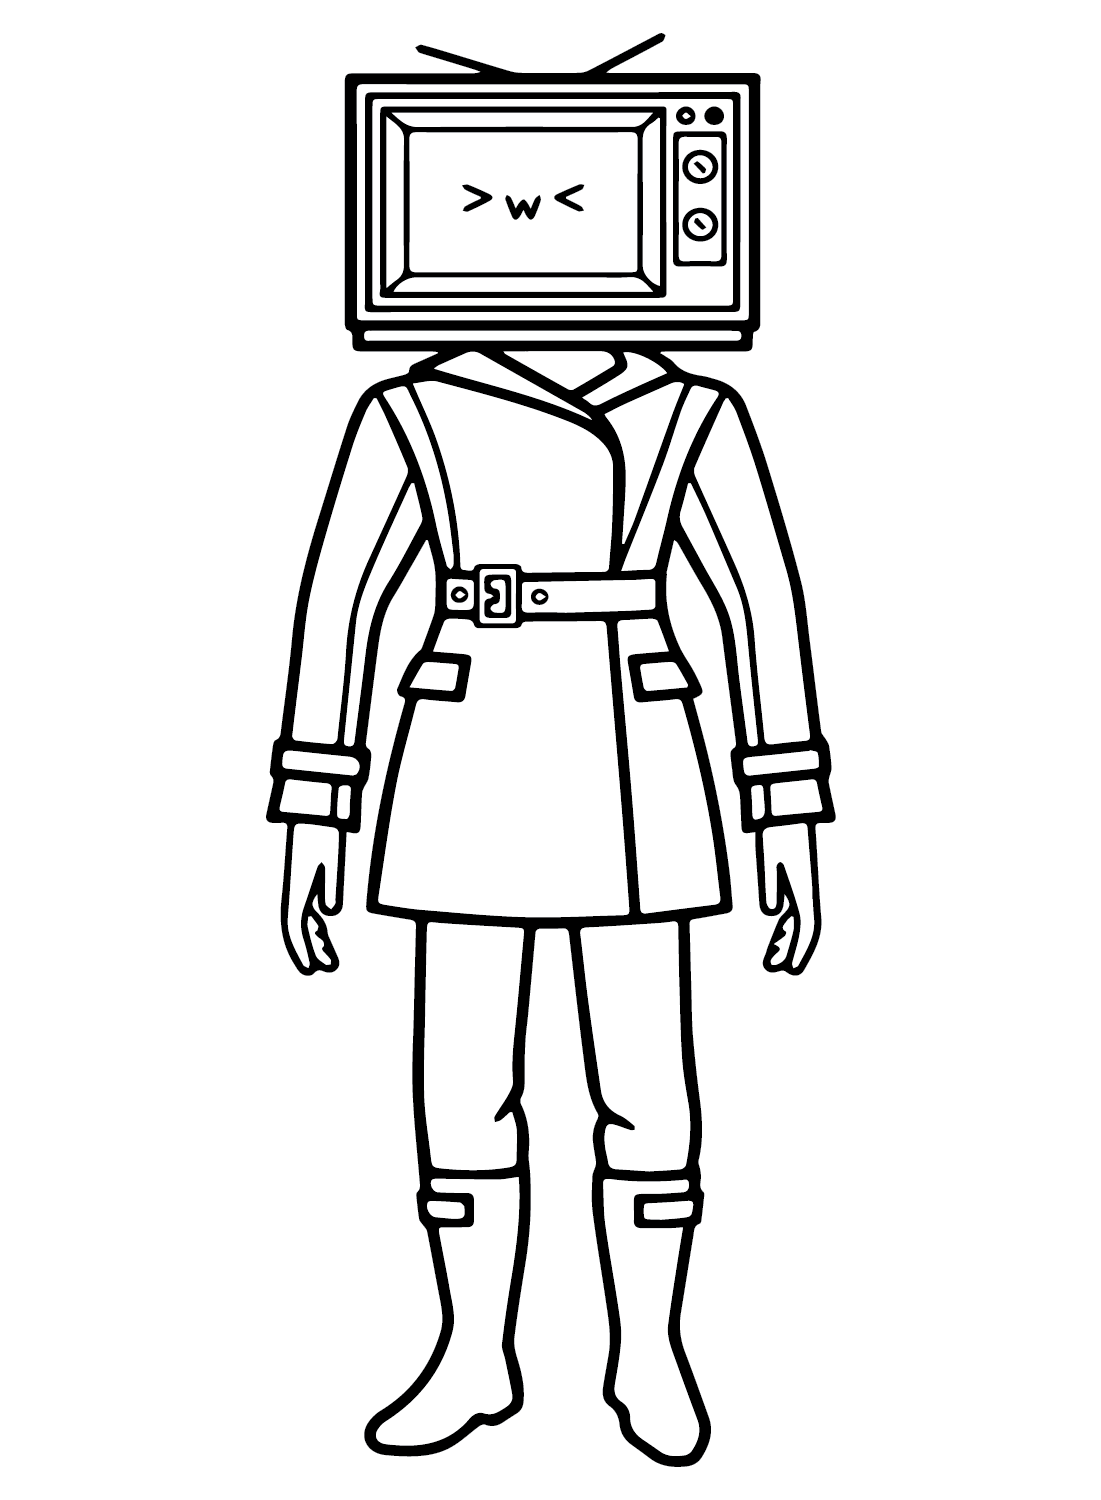 TV Woman Coloring Sheet for Kids from TV Man